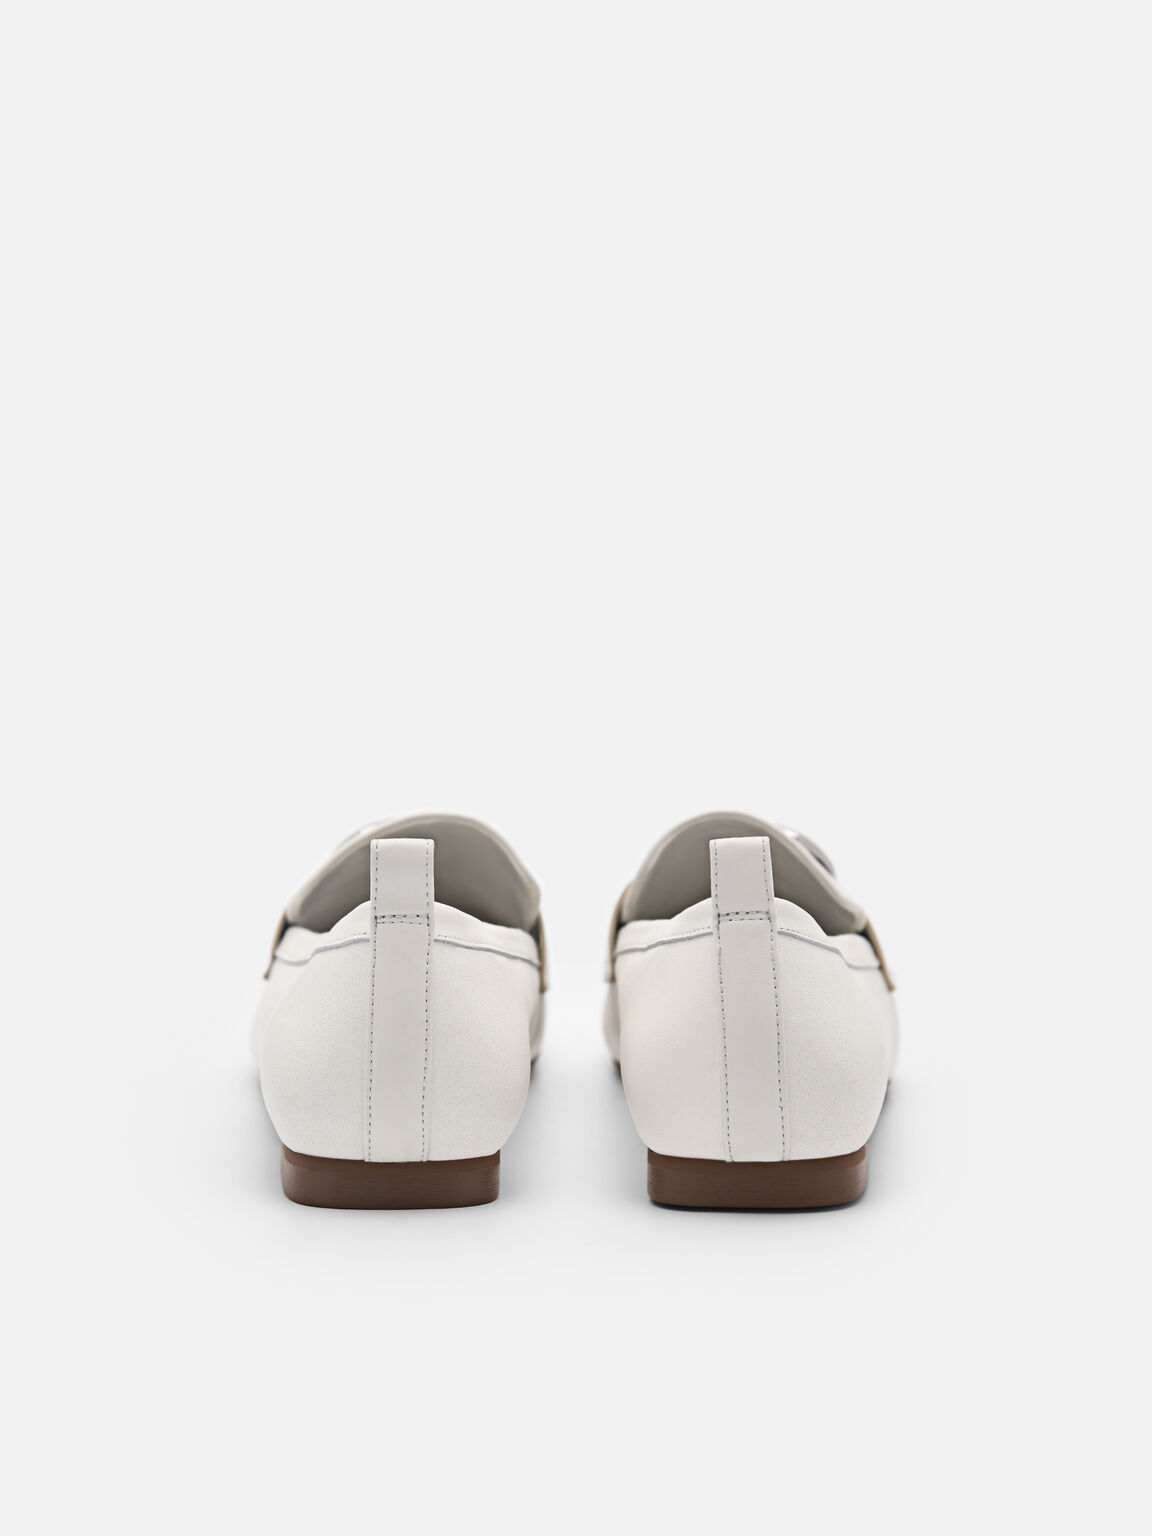 Eden Leather Loafers, White, hi-res